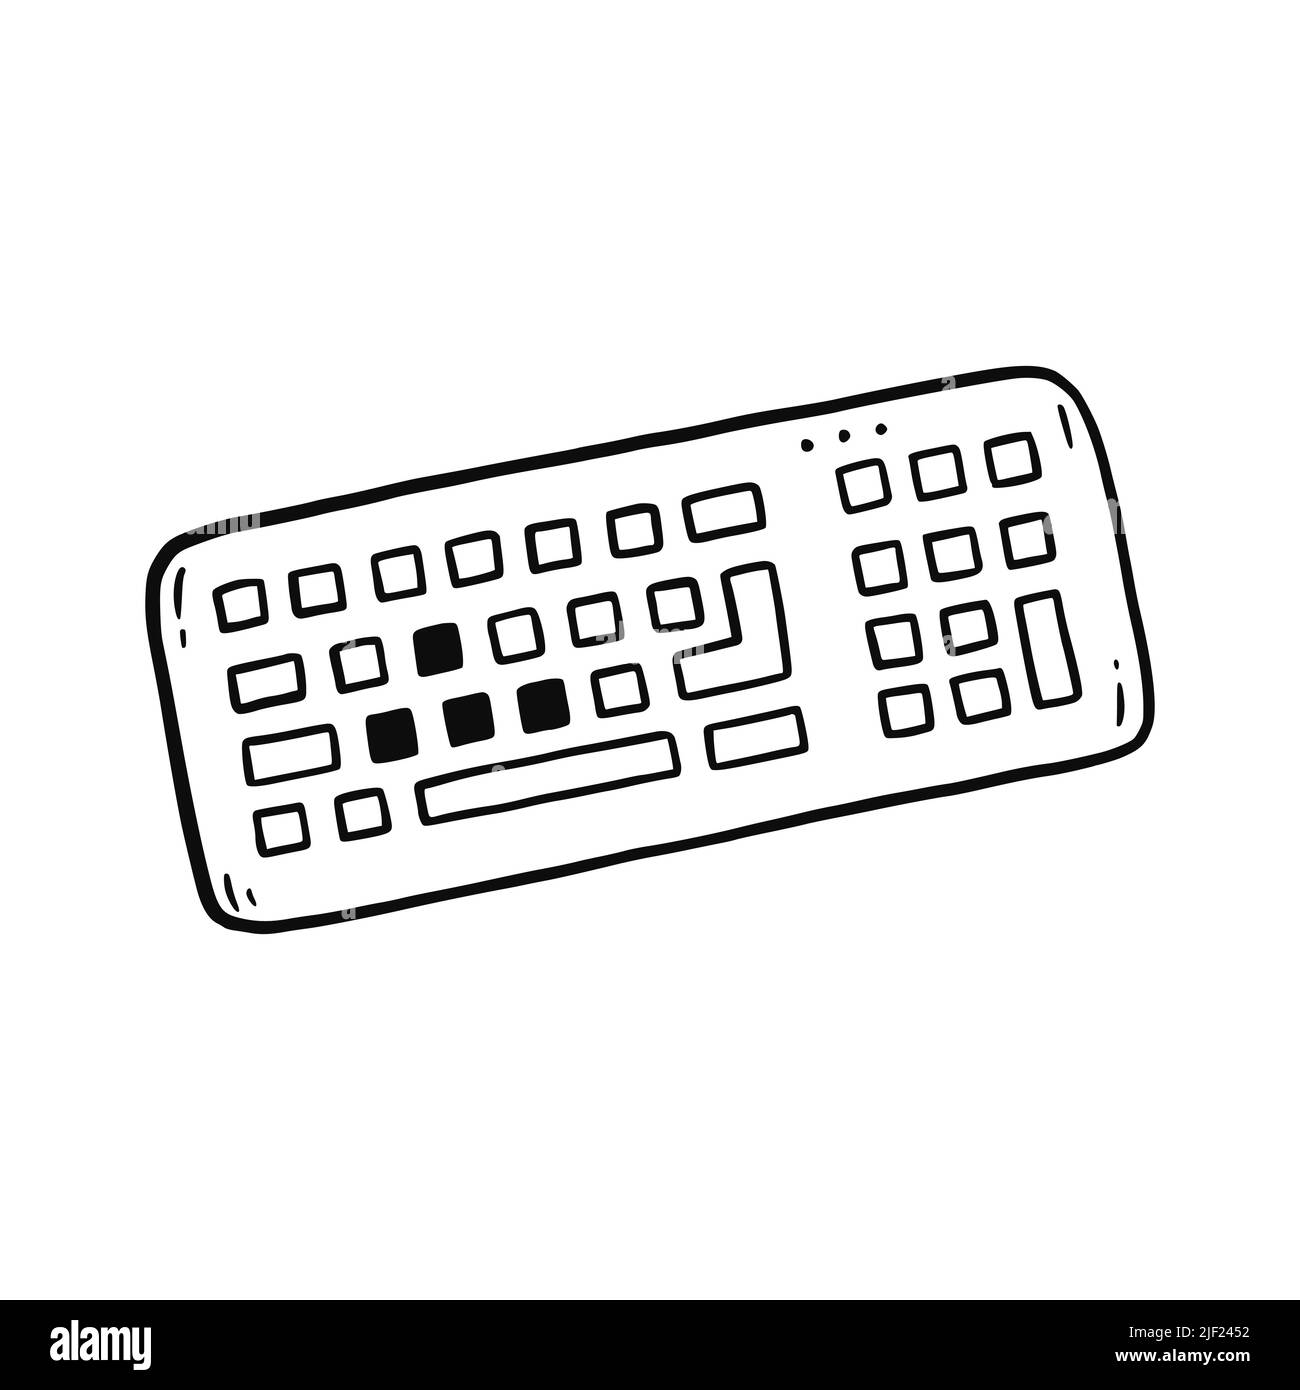 71,399 Keyboard Drawing Images, Stock Photos & Vectors | Shutterstock